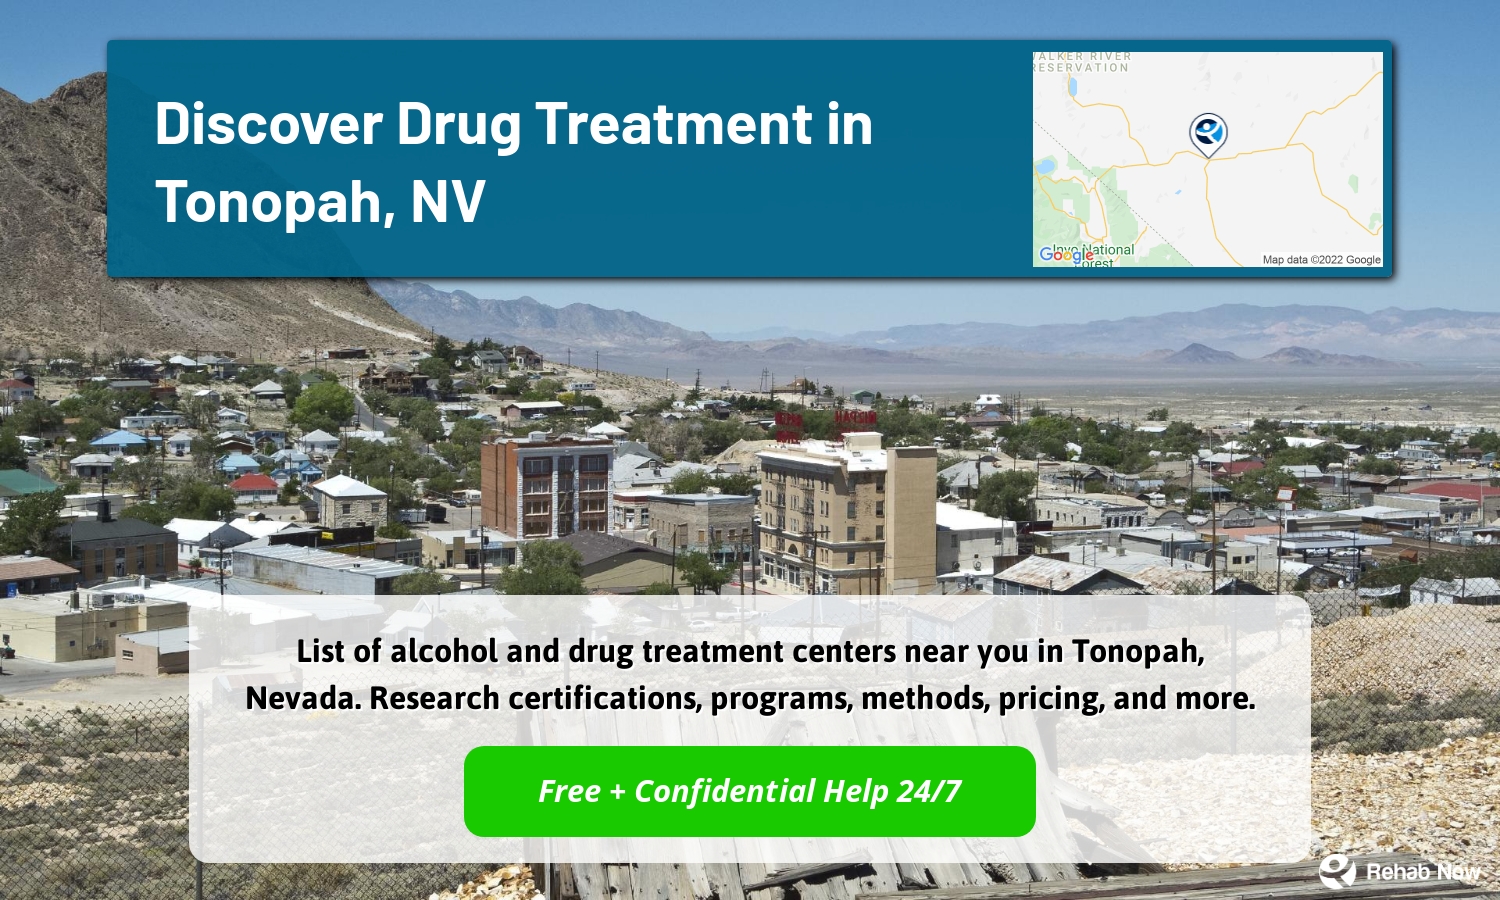 List of alcohol and drug treatment centers near you in Tonopah, Nevada. Research certifications, programs, methods, pricing, and more.